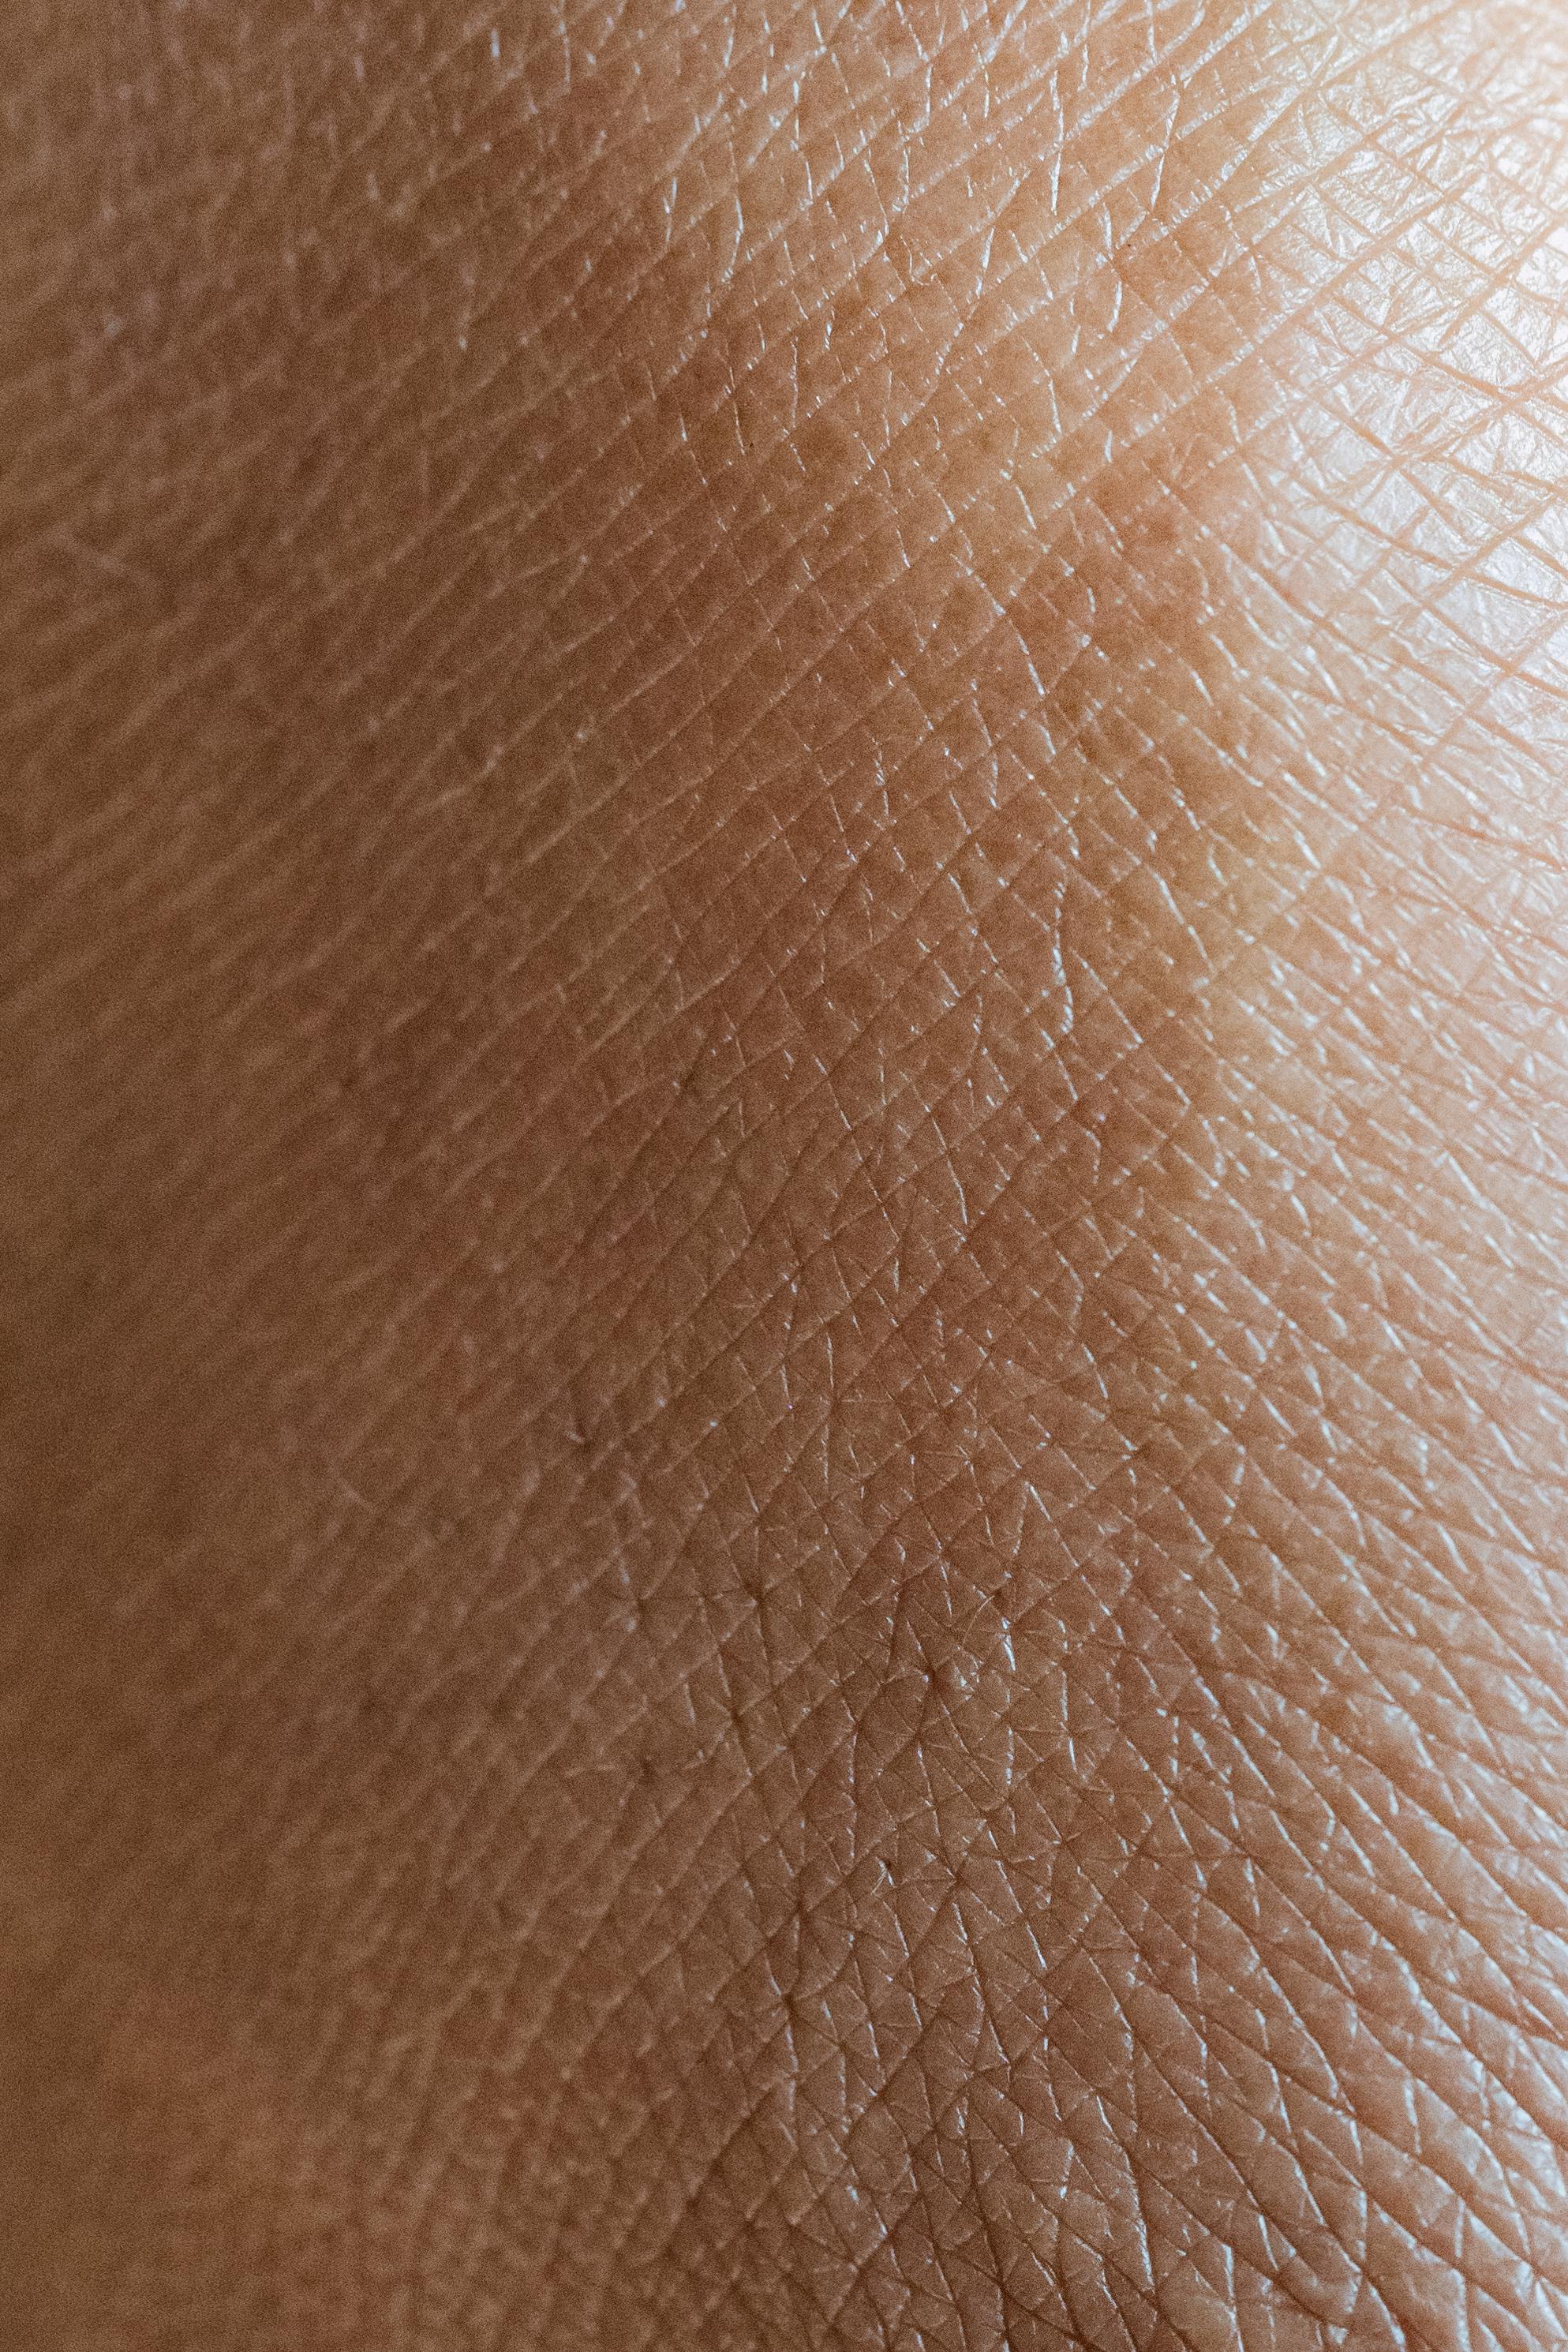 texture of soft skin of person